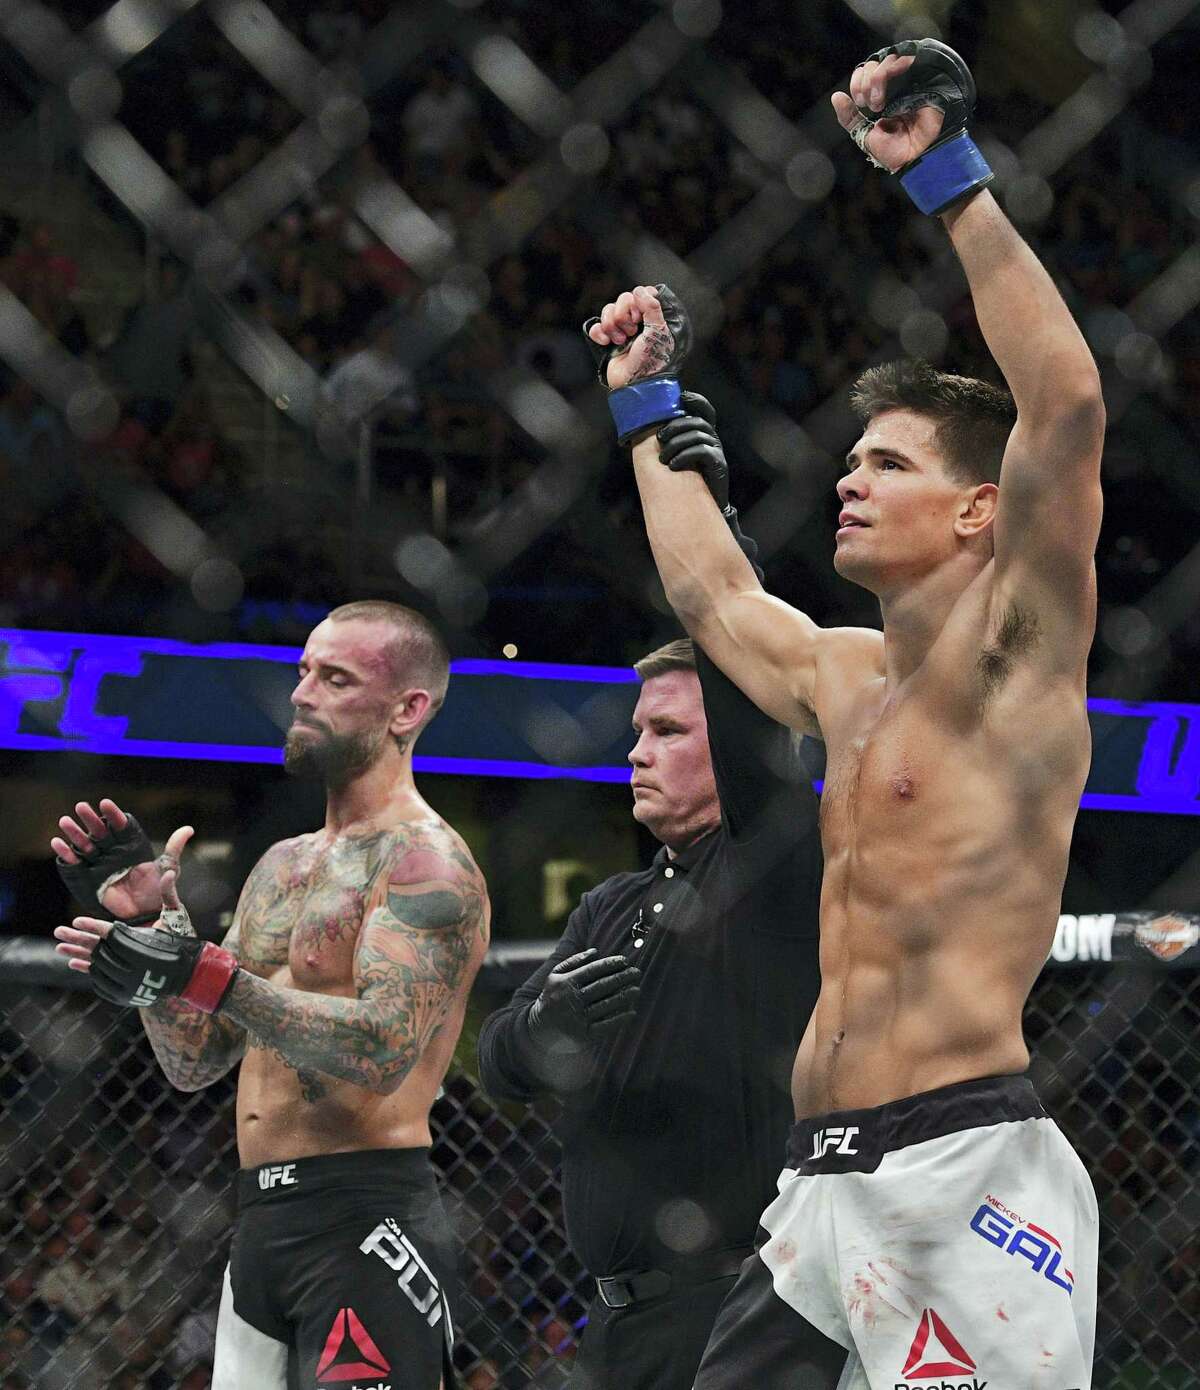 Mickey Gall has his arm raised by the referee after defeating CM Punk during a welterweight bout at UFC 203 on Saturday in Cleveland.